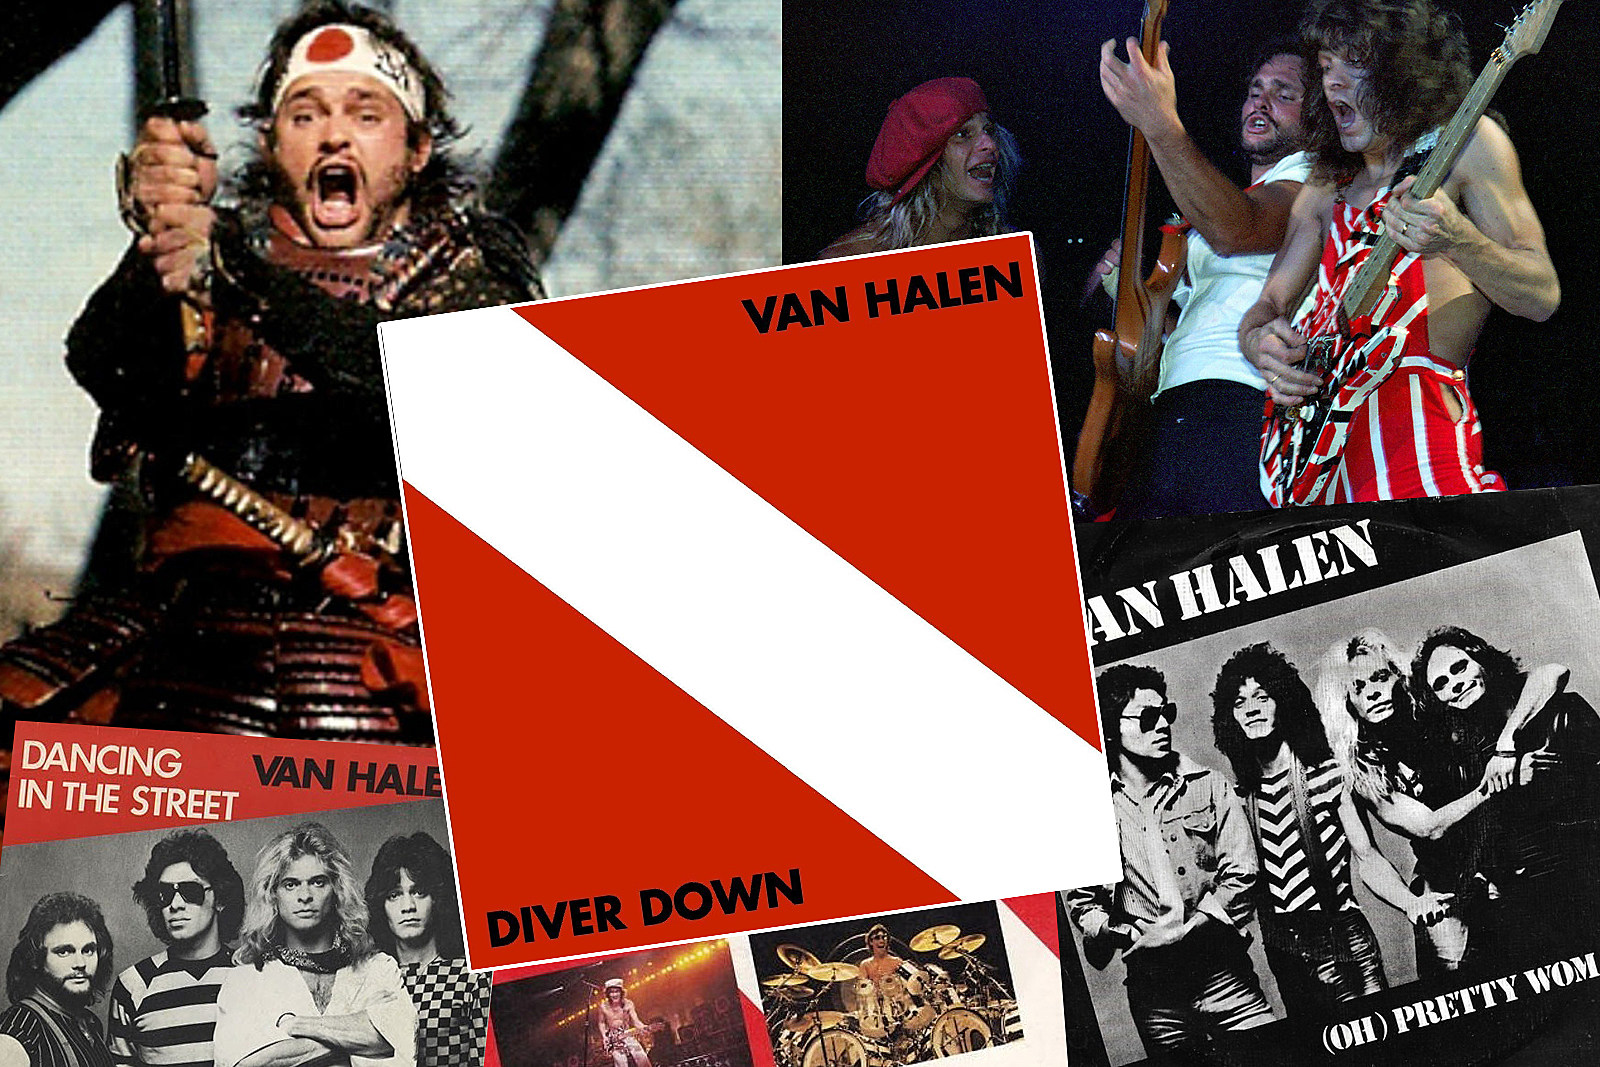 Van Halen's 'Diver Down': A Track-By-Track Guide